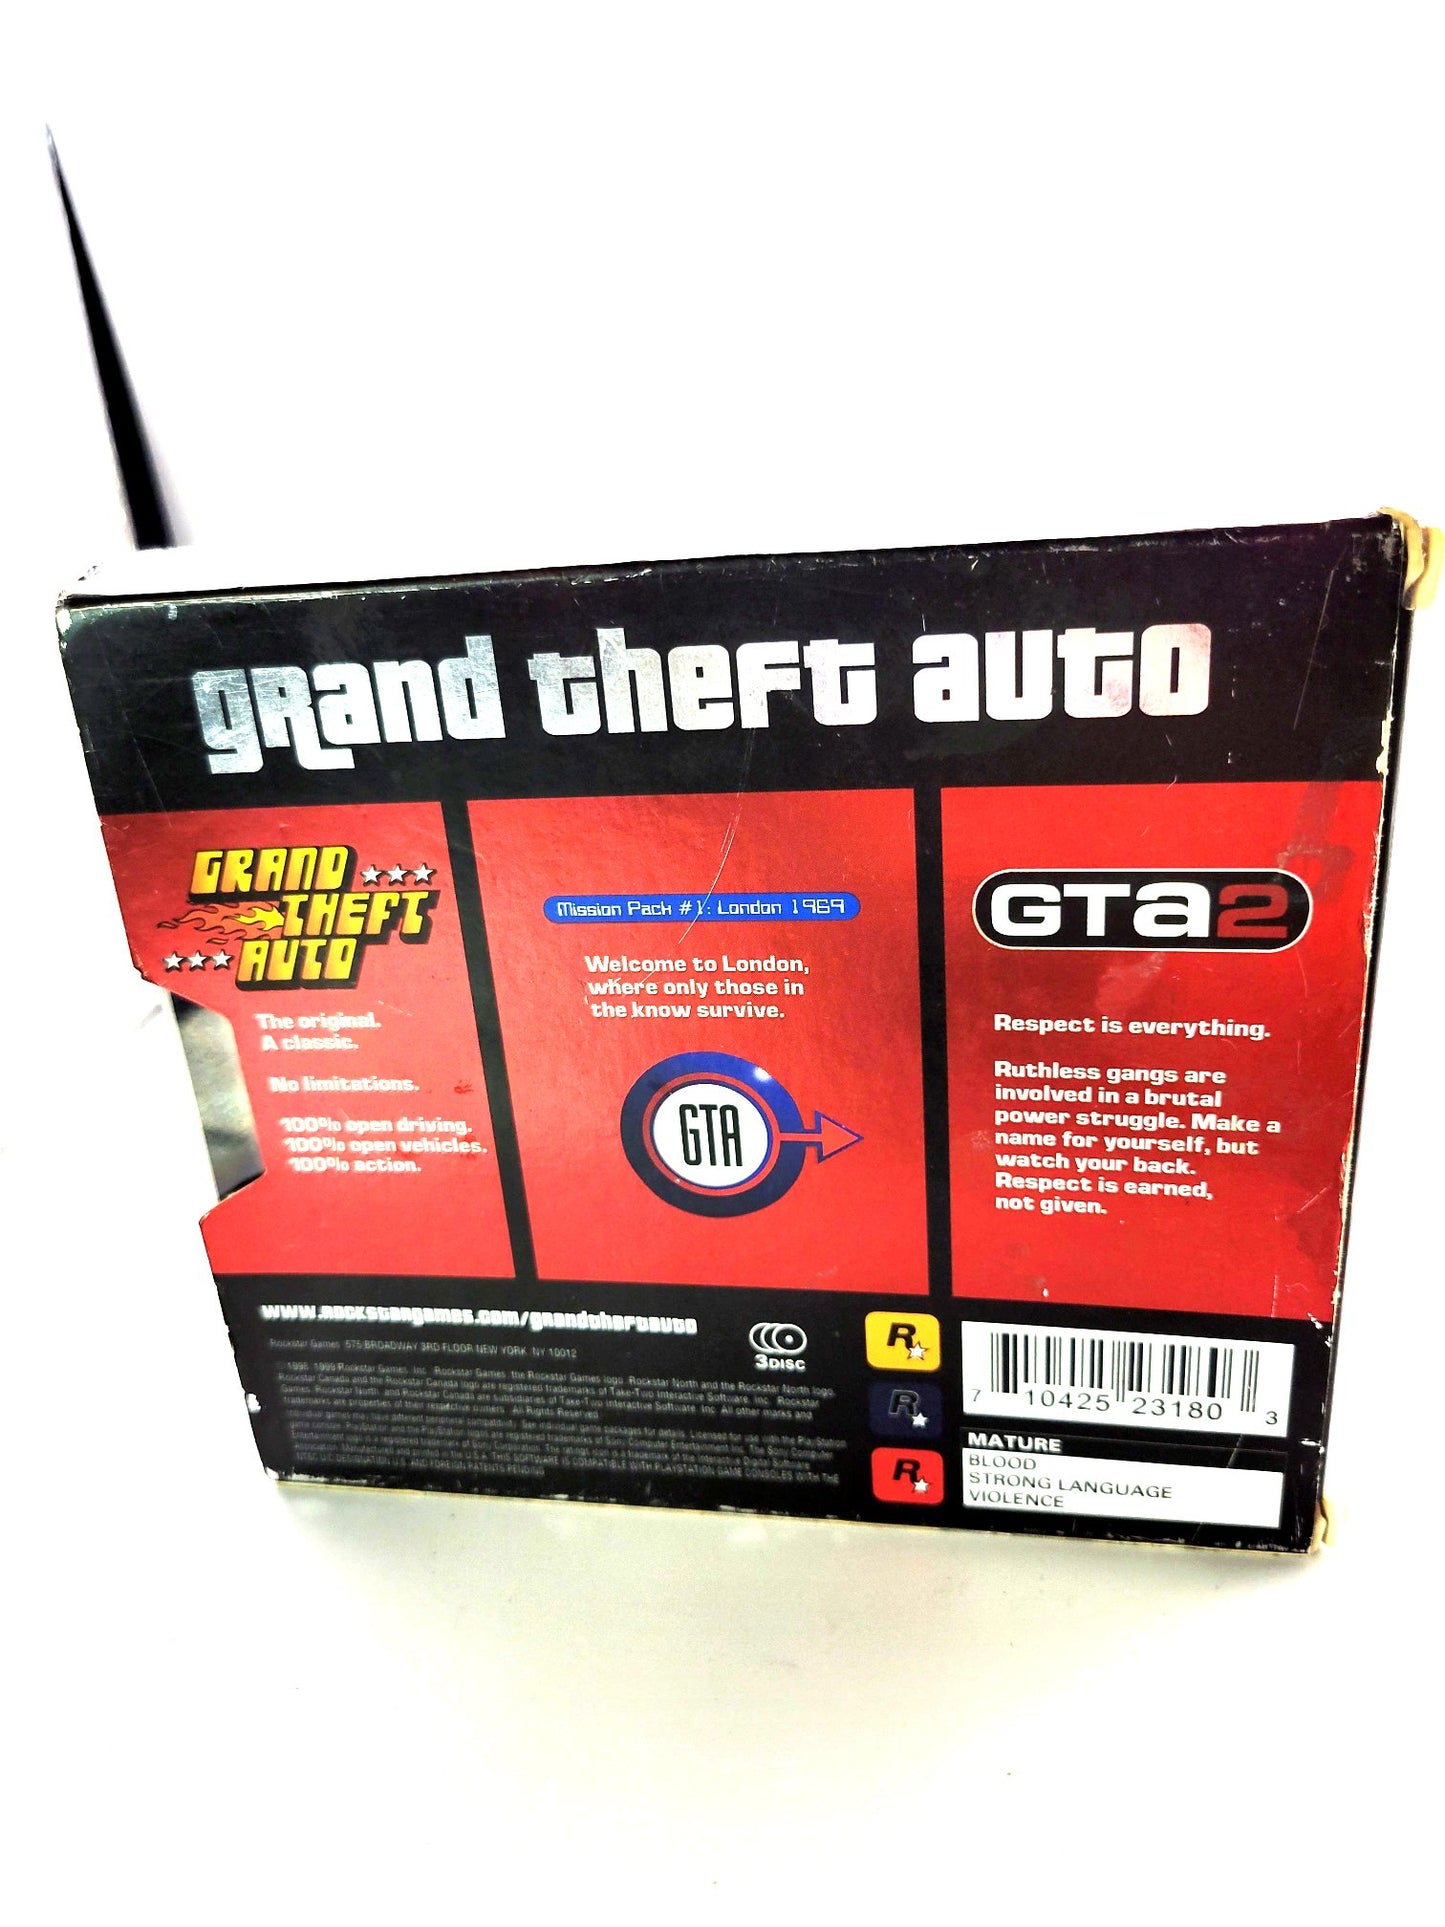 Sony Playstion One Grand Theft Auto Collector's Edition (1999)